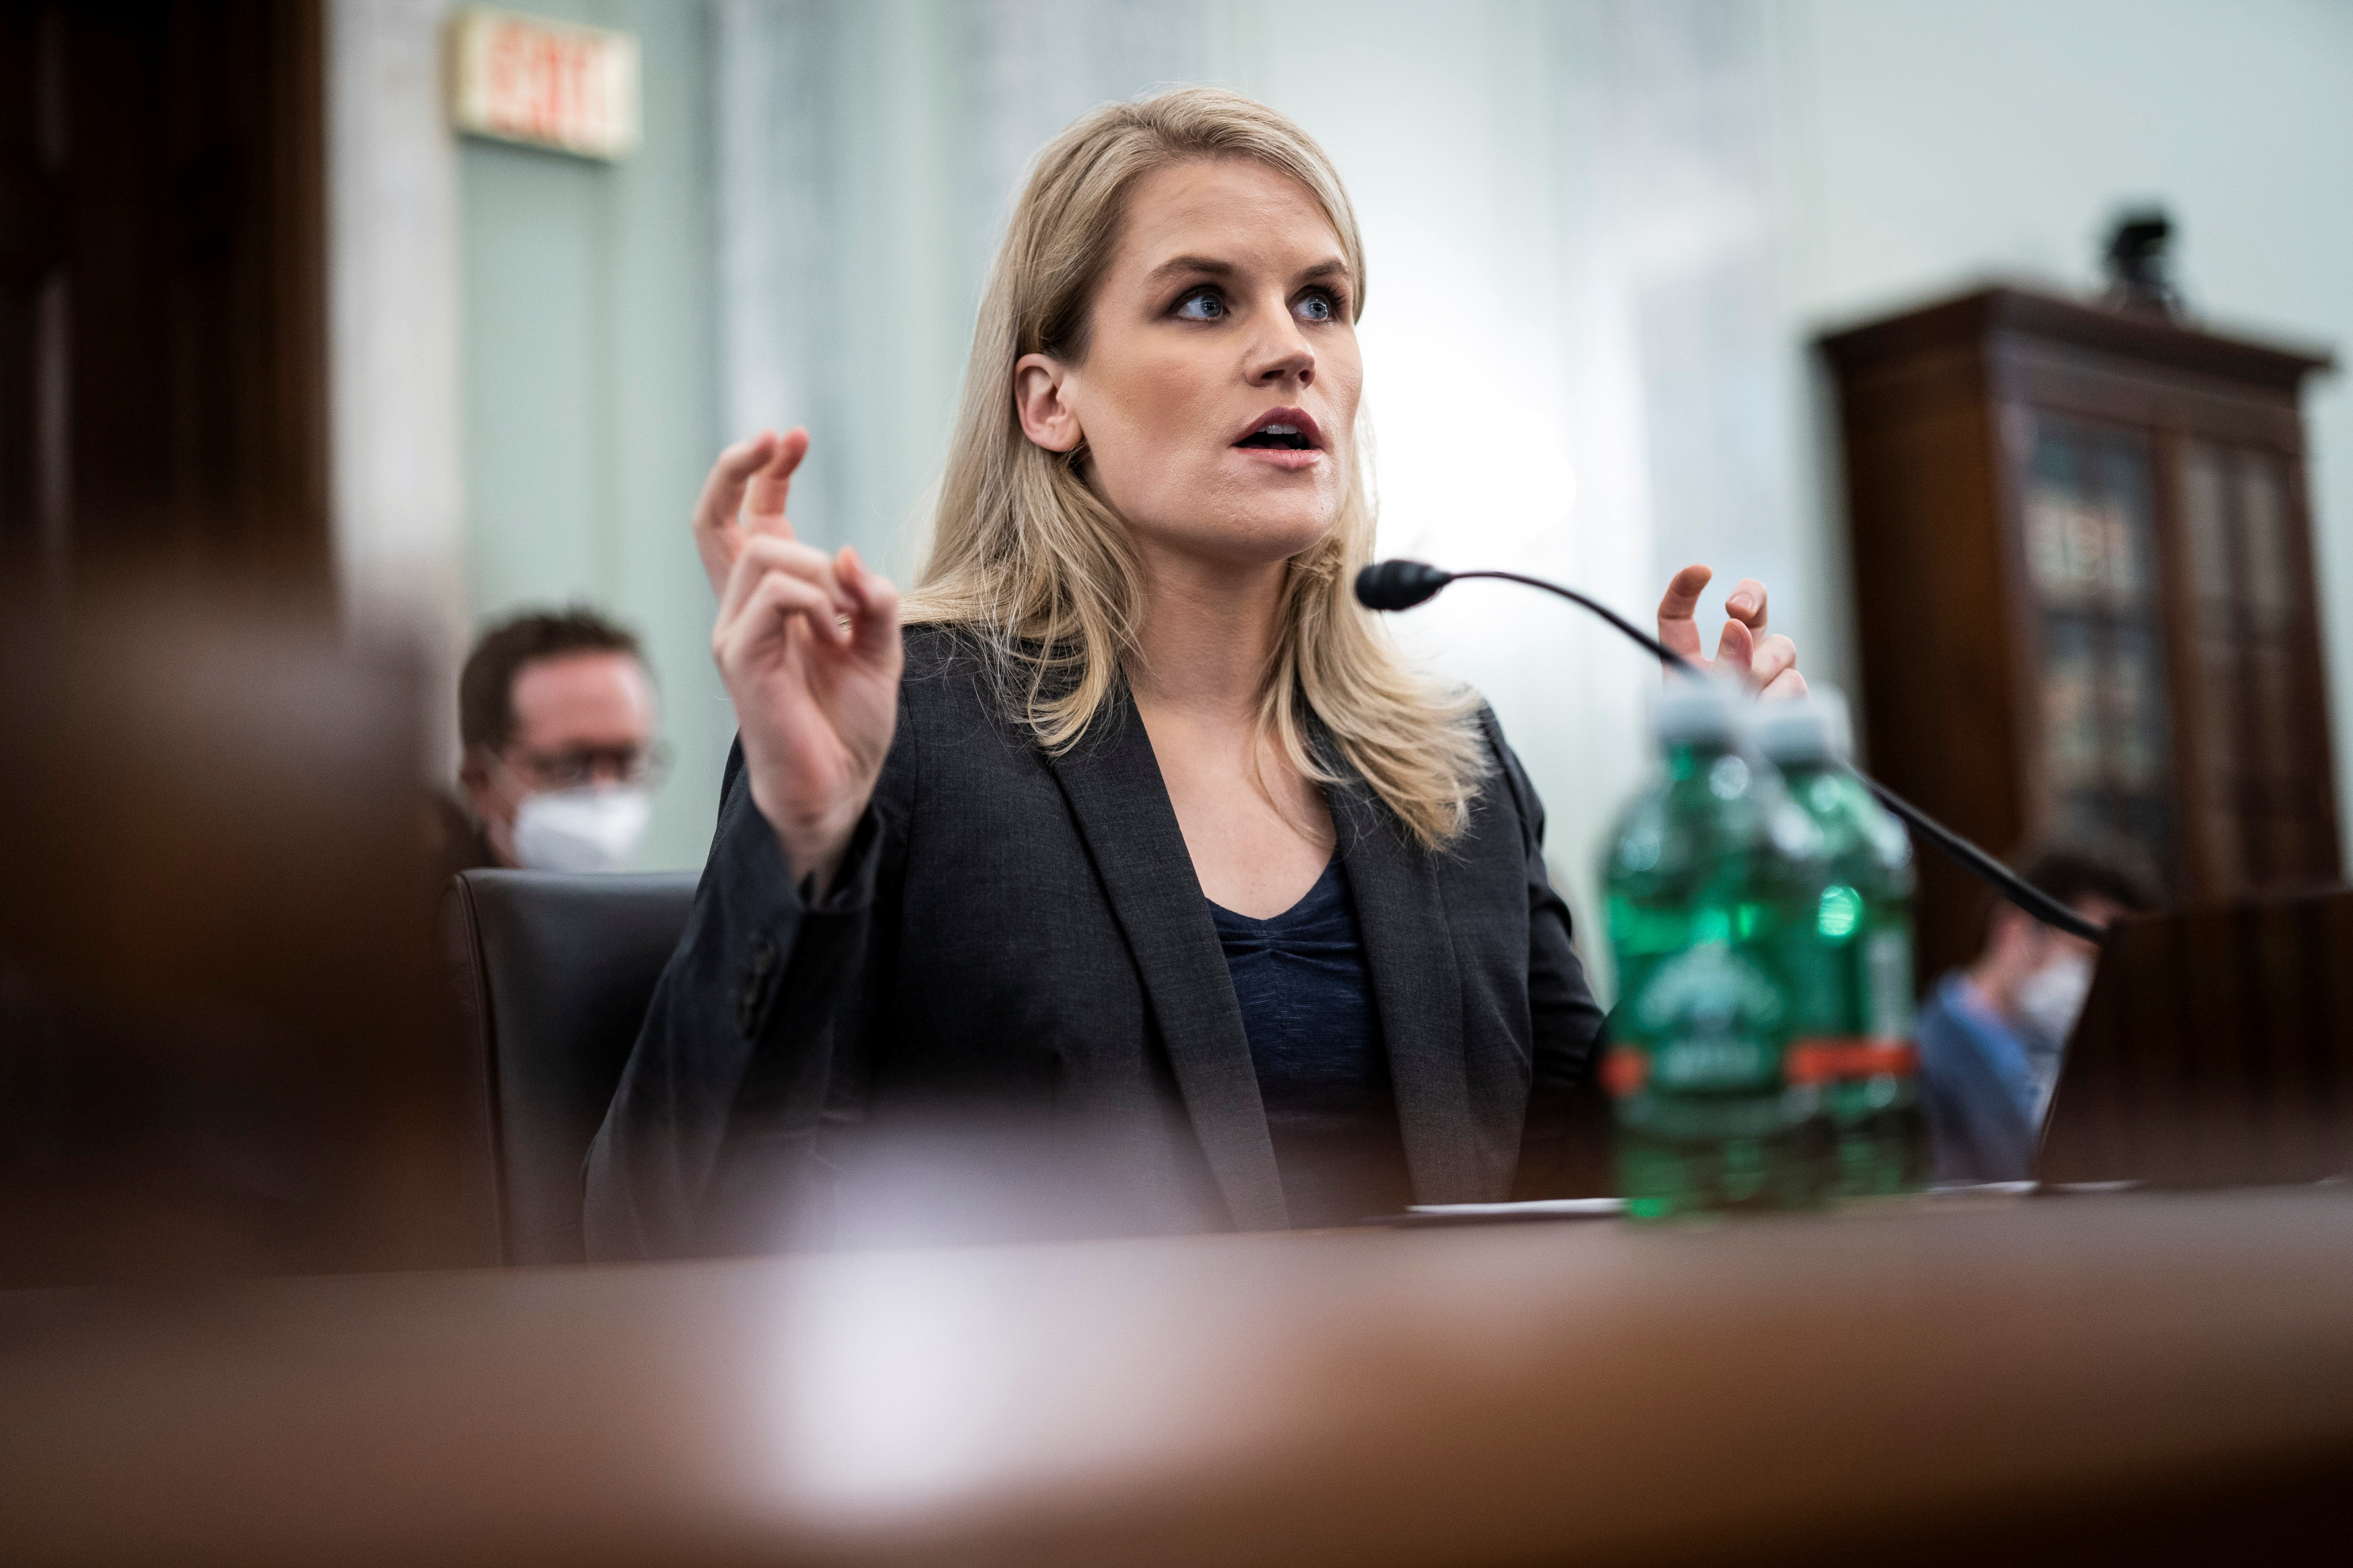 Former Facebook employee and whistleblower Frances Haugen testifies during a Senate Committee on Commerce, Science, and Transportation hearing entitled 'Protecting Kids Online: Testimony from a Facebook Whistleblower' on Capitol Hill, in Washington, U.S., October 5, 2021.   Jabin Botsford/Pool via REUTERS